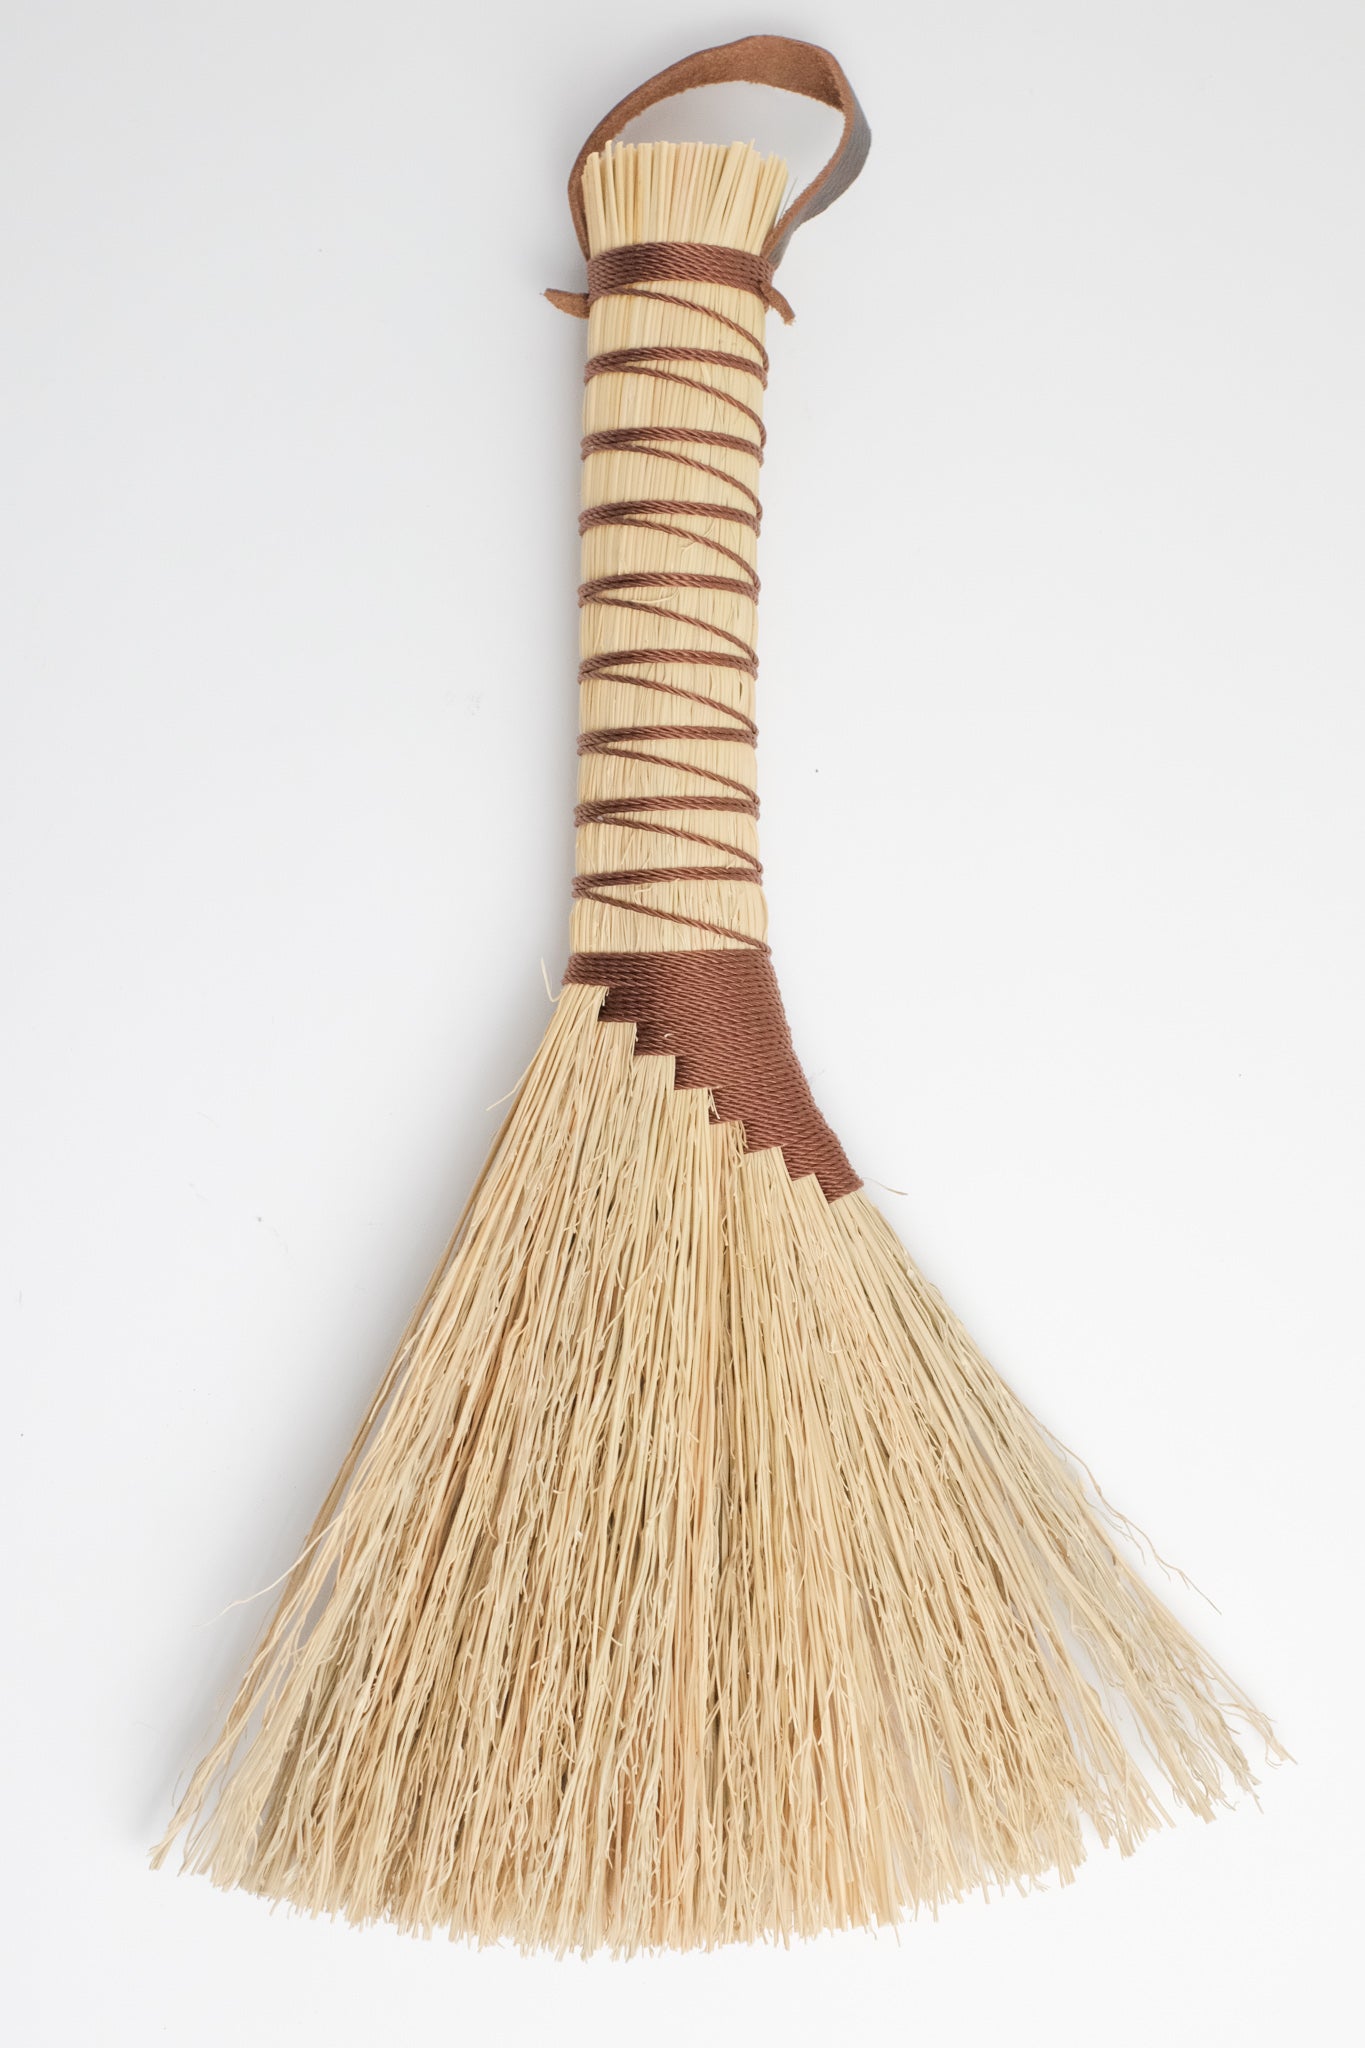 Whiskbrooms